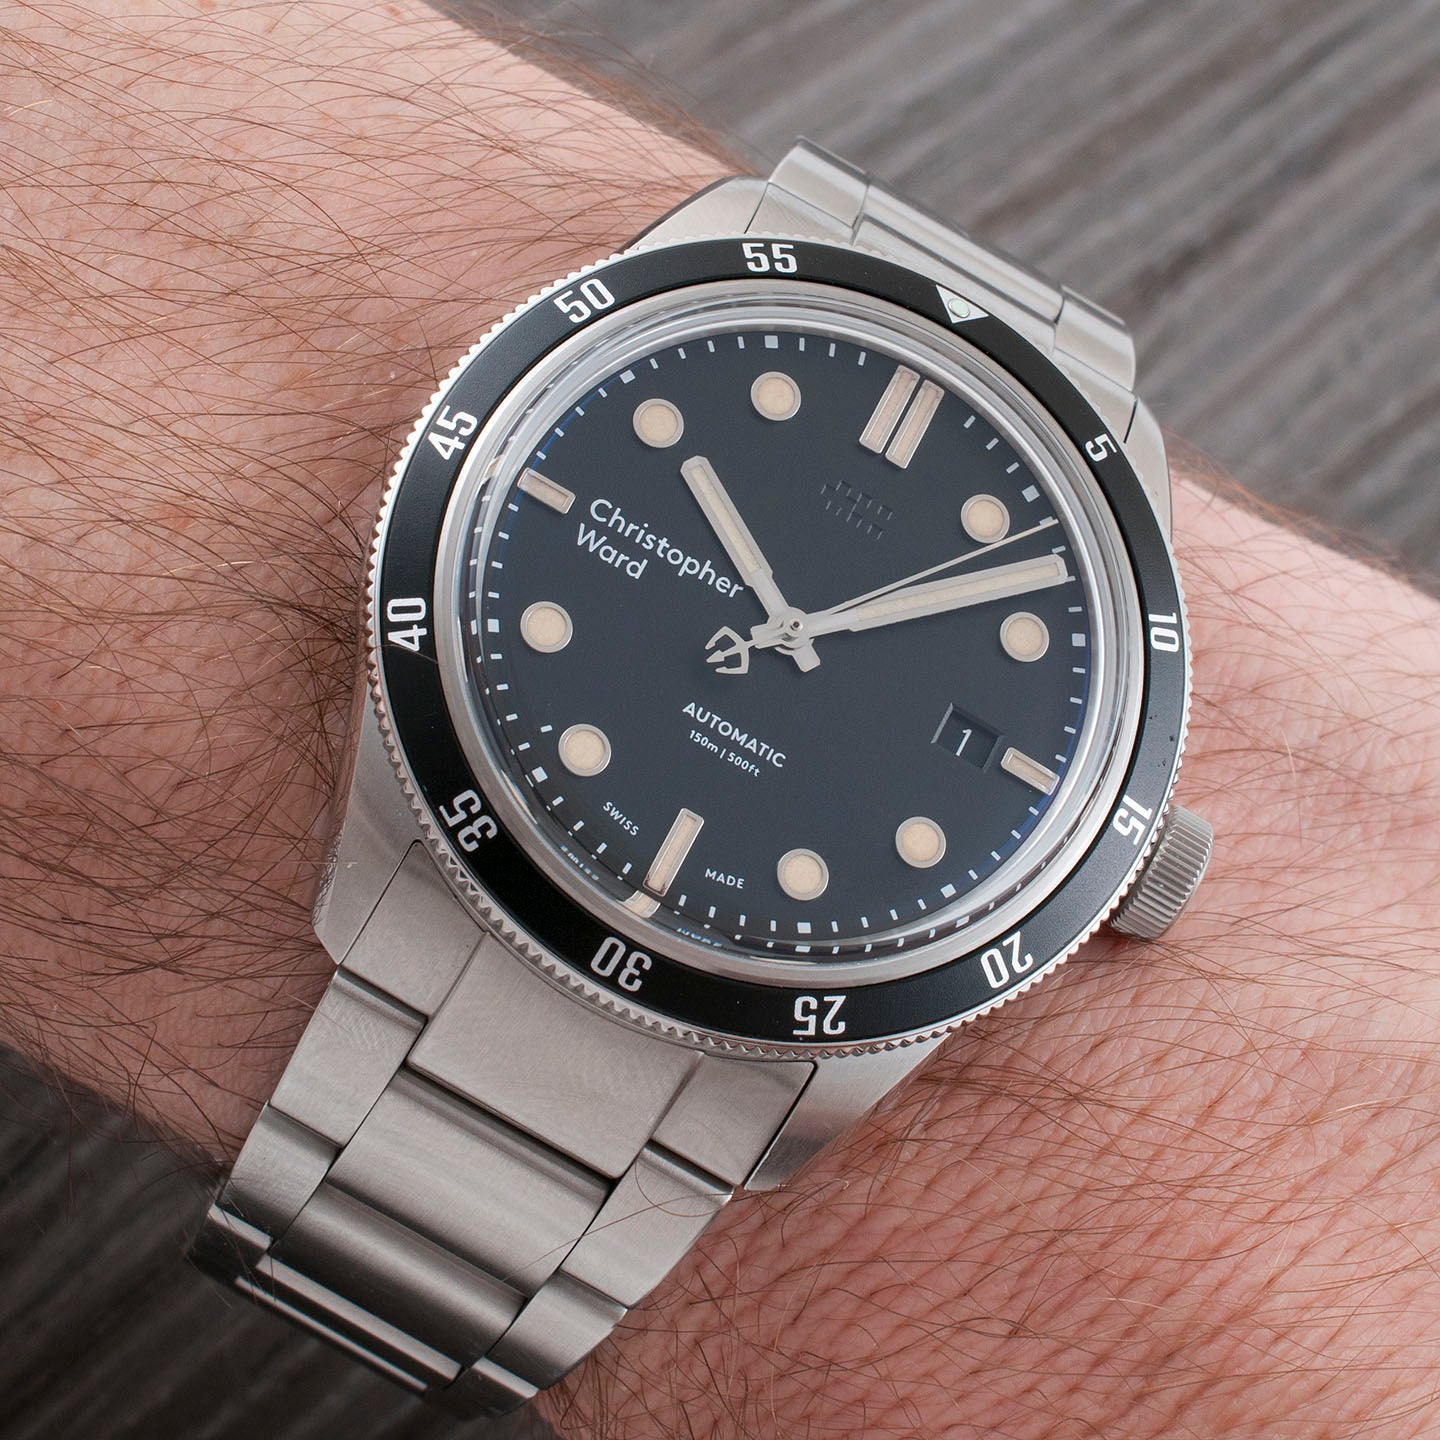 Christopher Ward C65 Trident Automatic Watch Review C65-41ADA1 